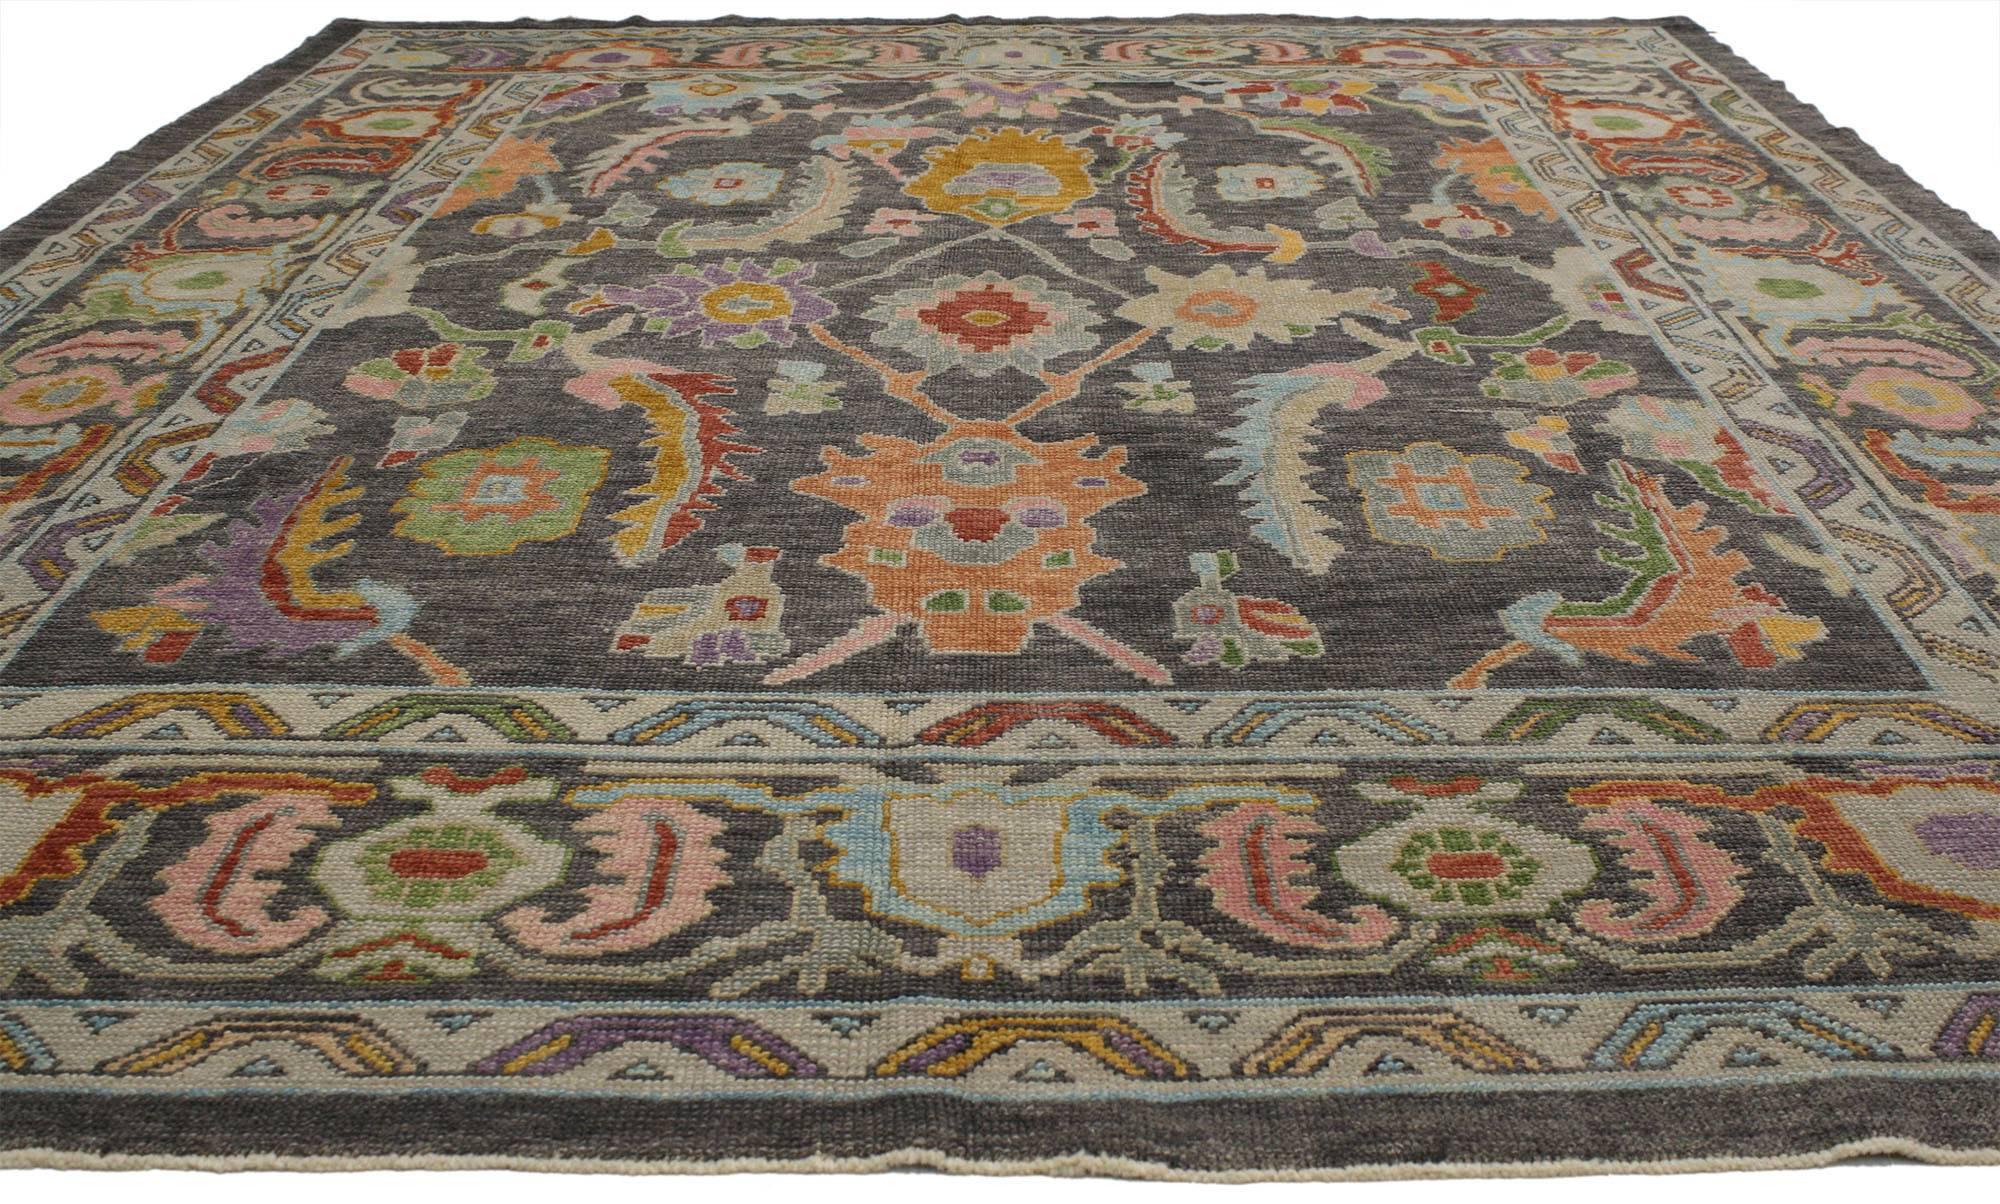 52242 Contemporary Turkish Oushak rug with Modern Style 09.06 x 12.04. This Contemporary Turkish Oushak rug with Modern Style blooms with a garden of geometric flowers and angular vines in a lush design of botehs and palmettes with pattern